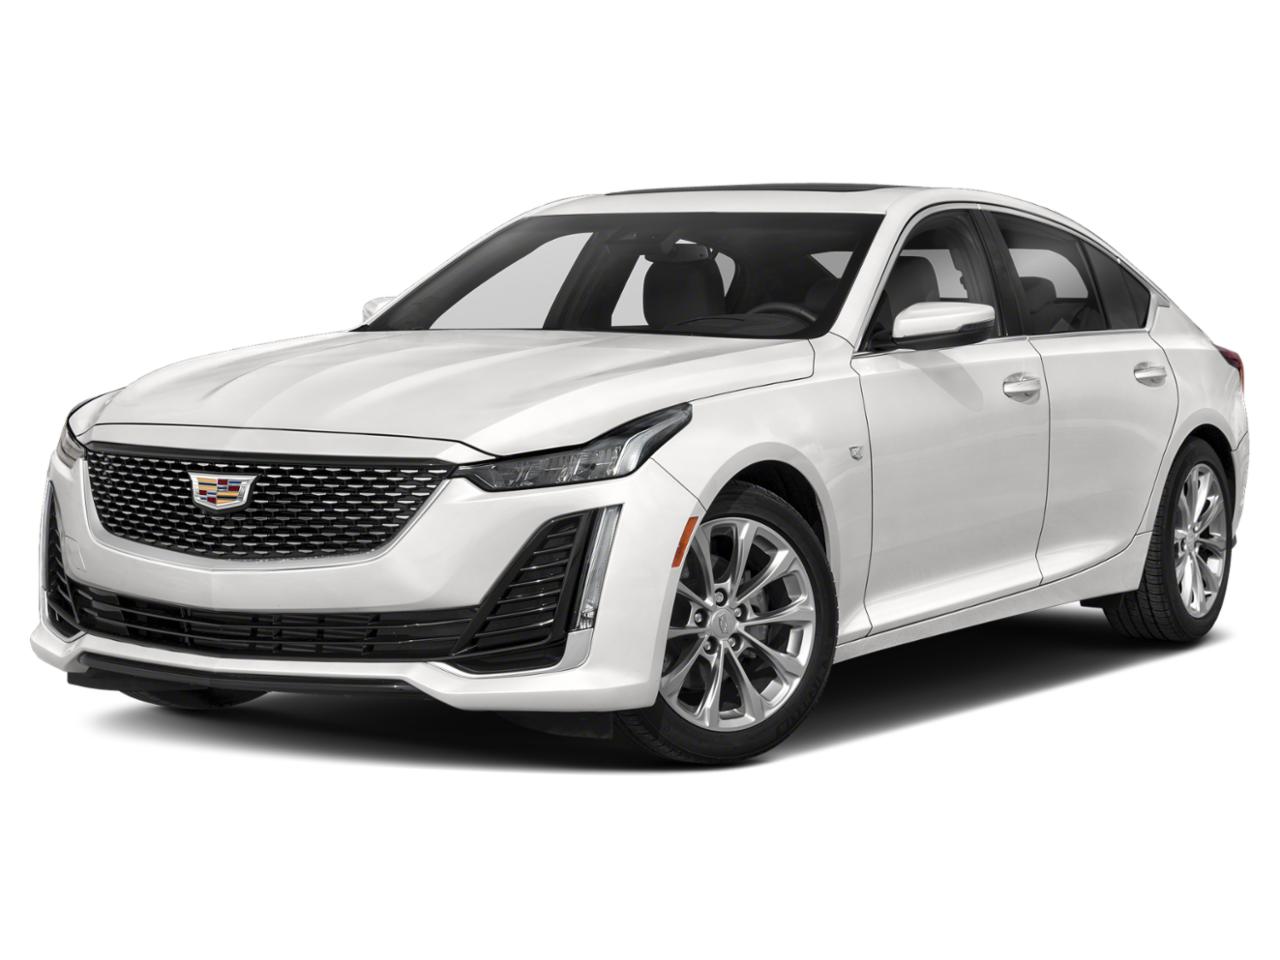 2021 Cadillac CT5 Vehicle Photo in Hollywood, FL 33021